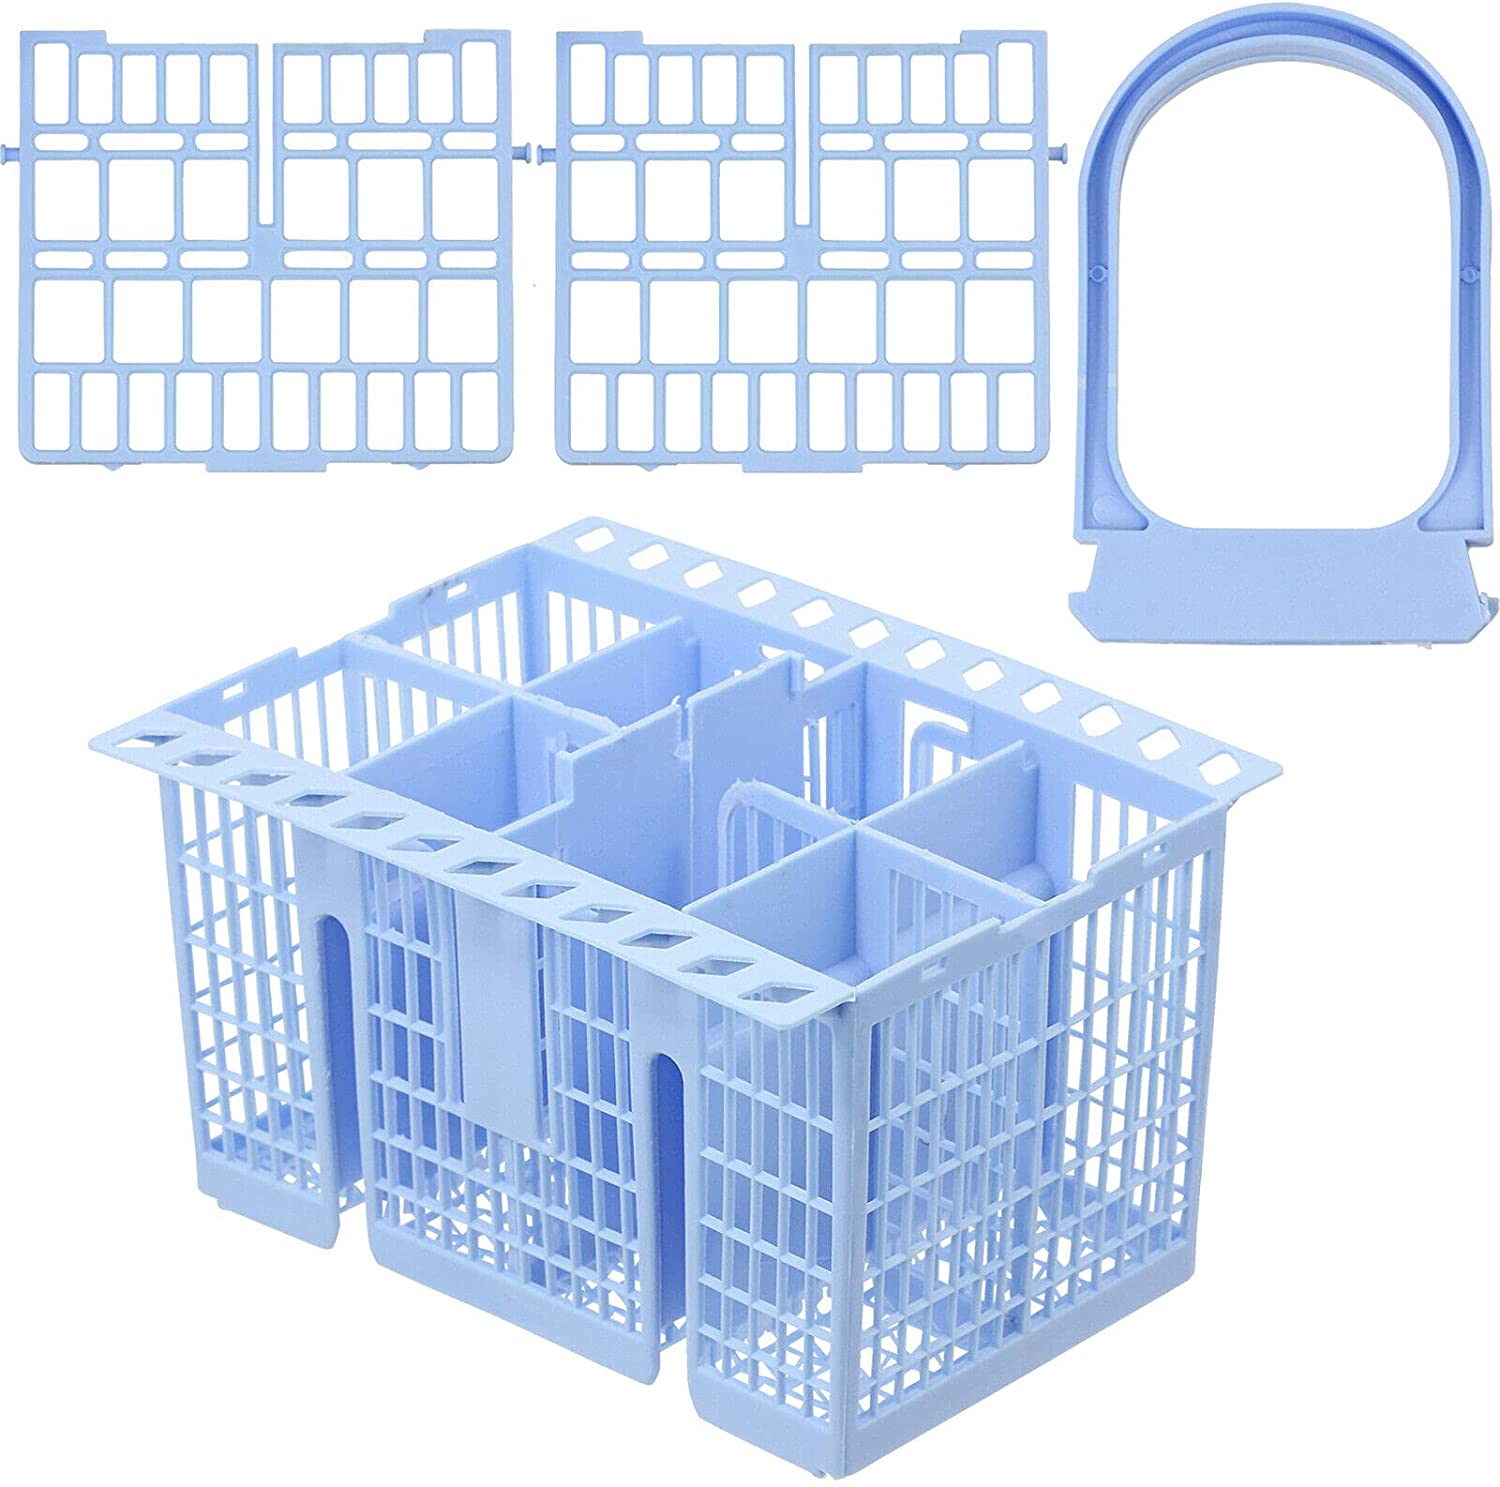 SPARES2GO Cutlery Basket compatible with Caple Dishwasher (Blue, 220 x 208 x 160mm)